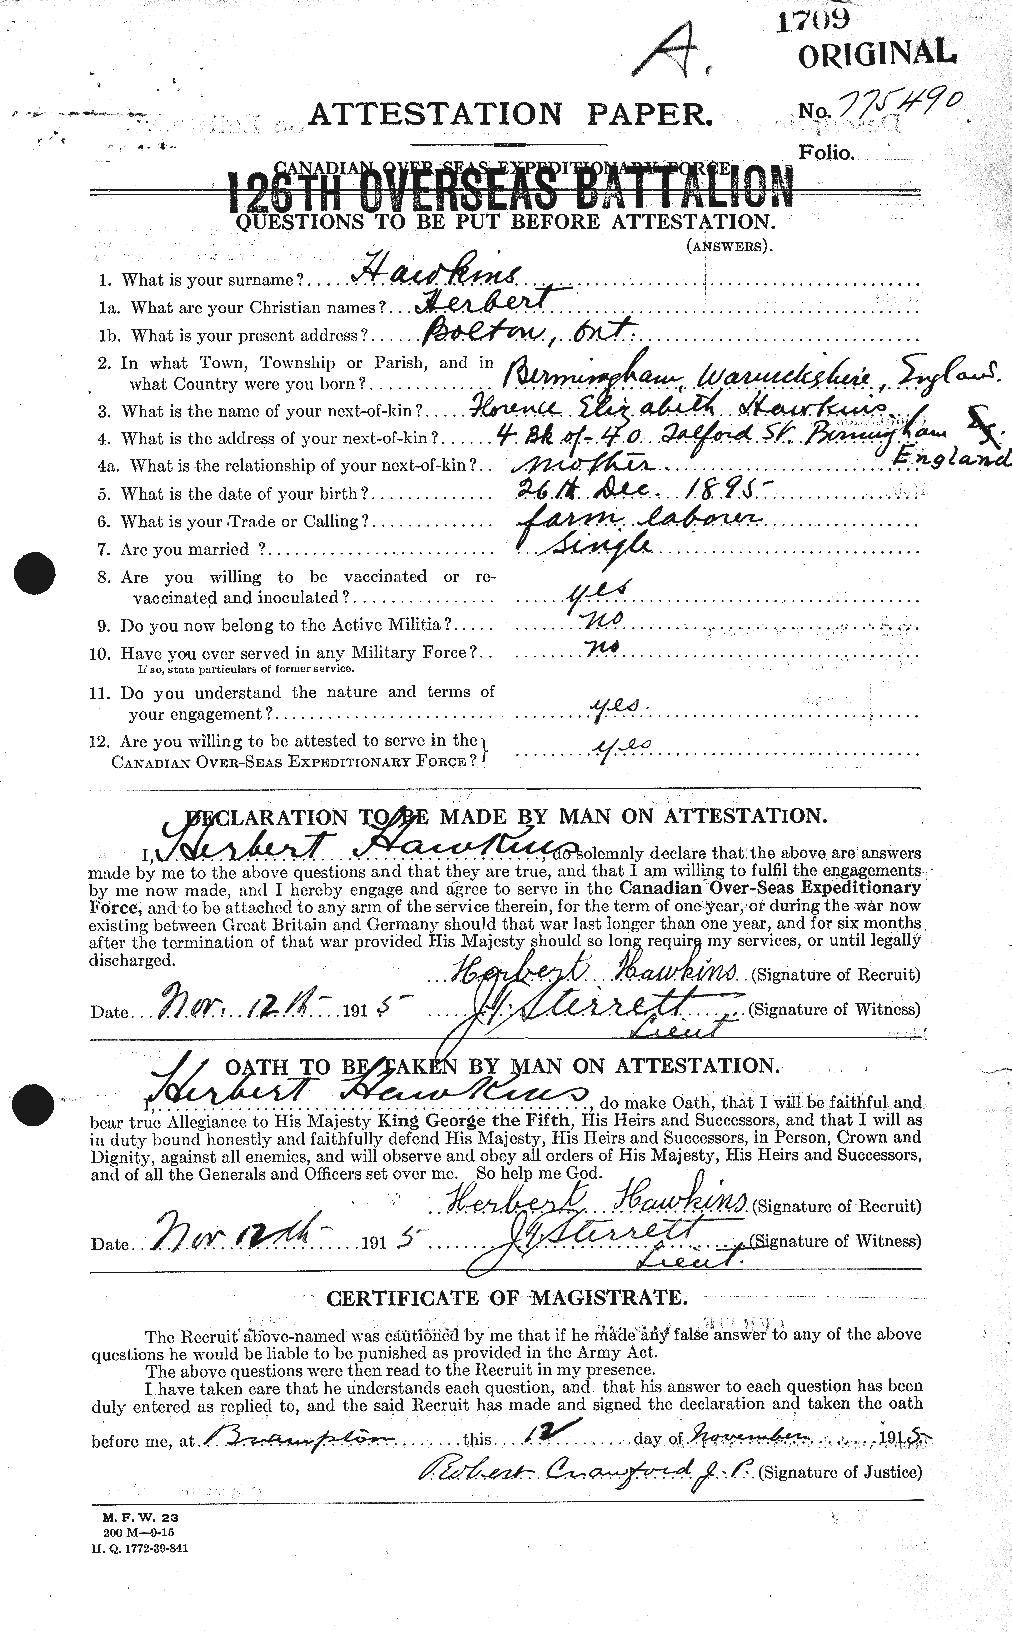 Personnel Records of the First World War - CEF 387149a